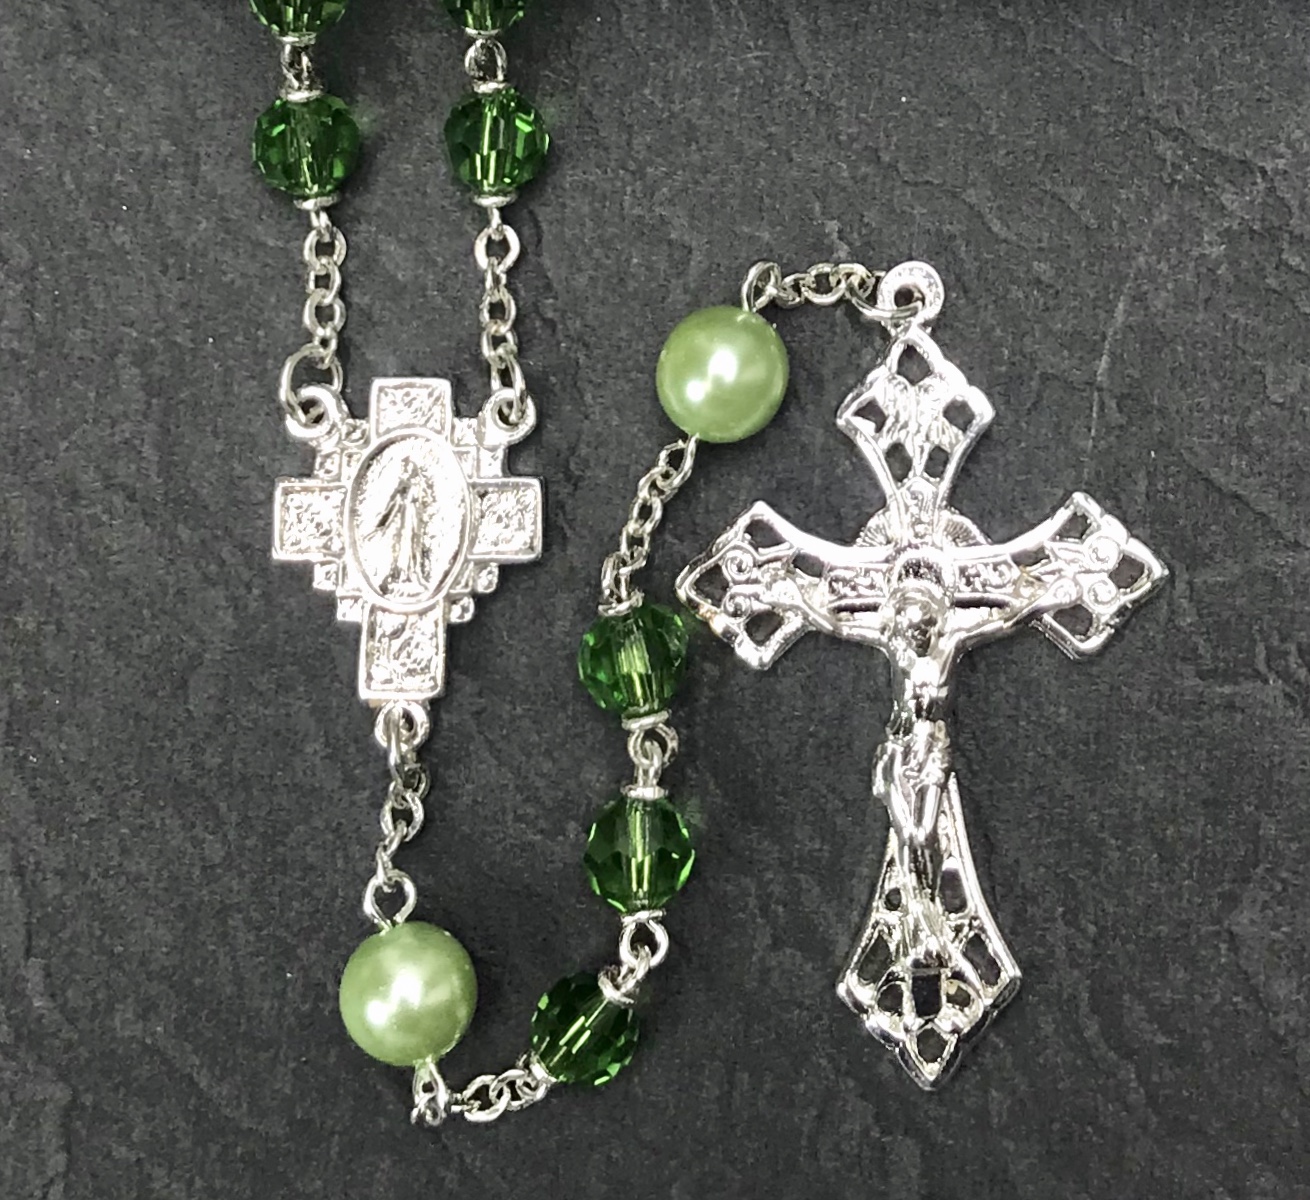 6mm PERIDOT TIN CUT WITH PEARL OUR FATHER BEADS WITH STERLING SILVER PLATE ROSARY BOXED